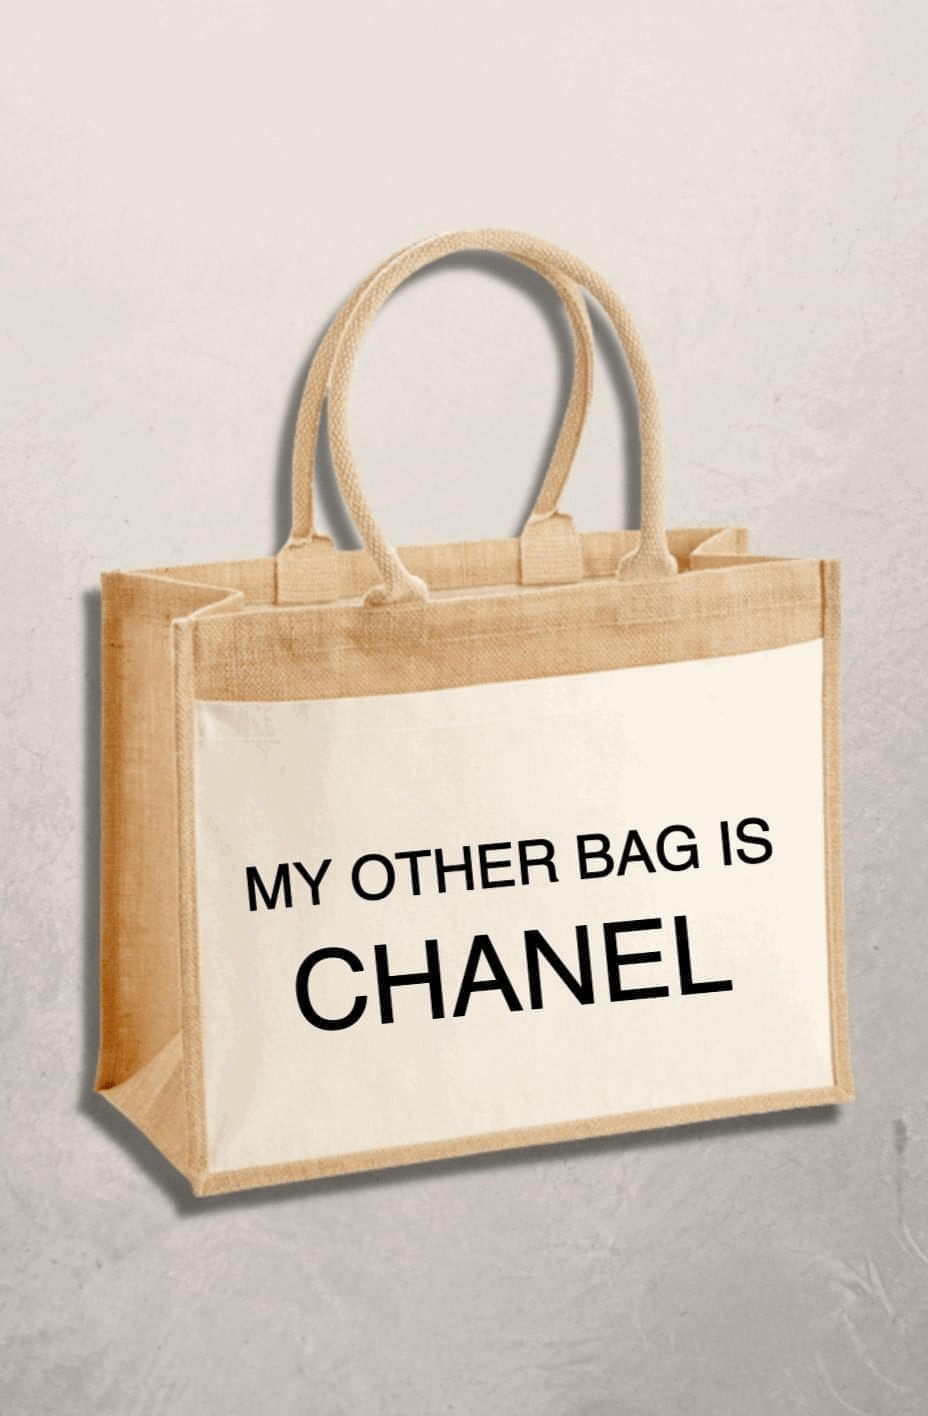 THE STORY OF MY CHANEL BAG